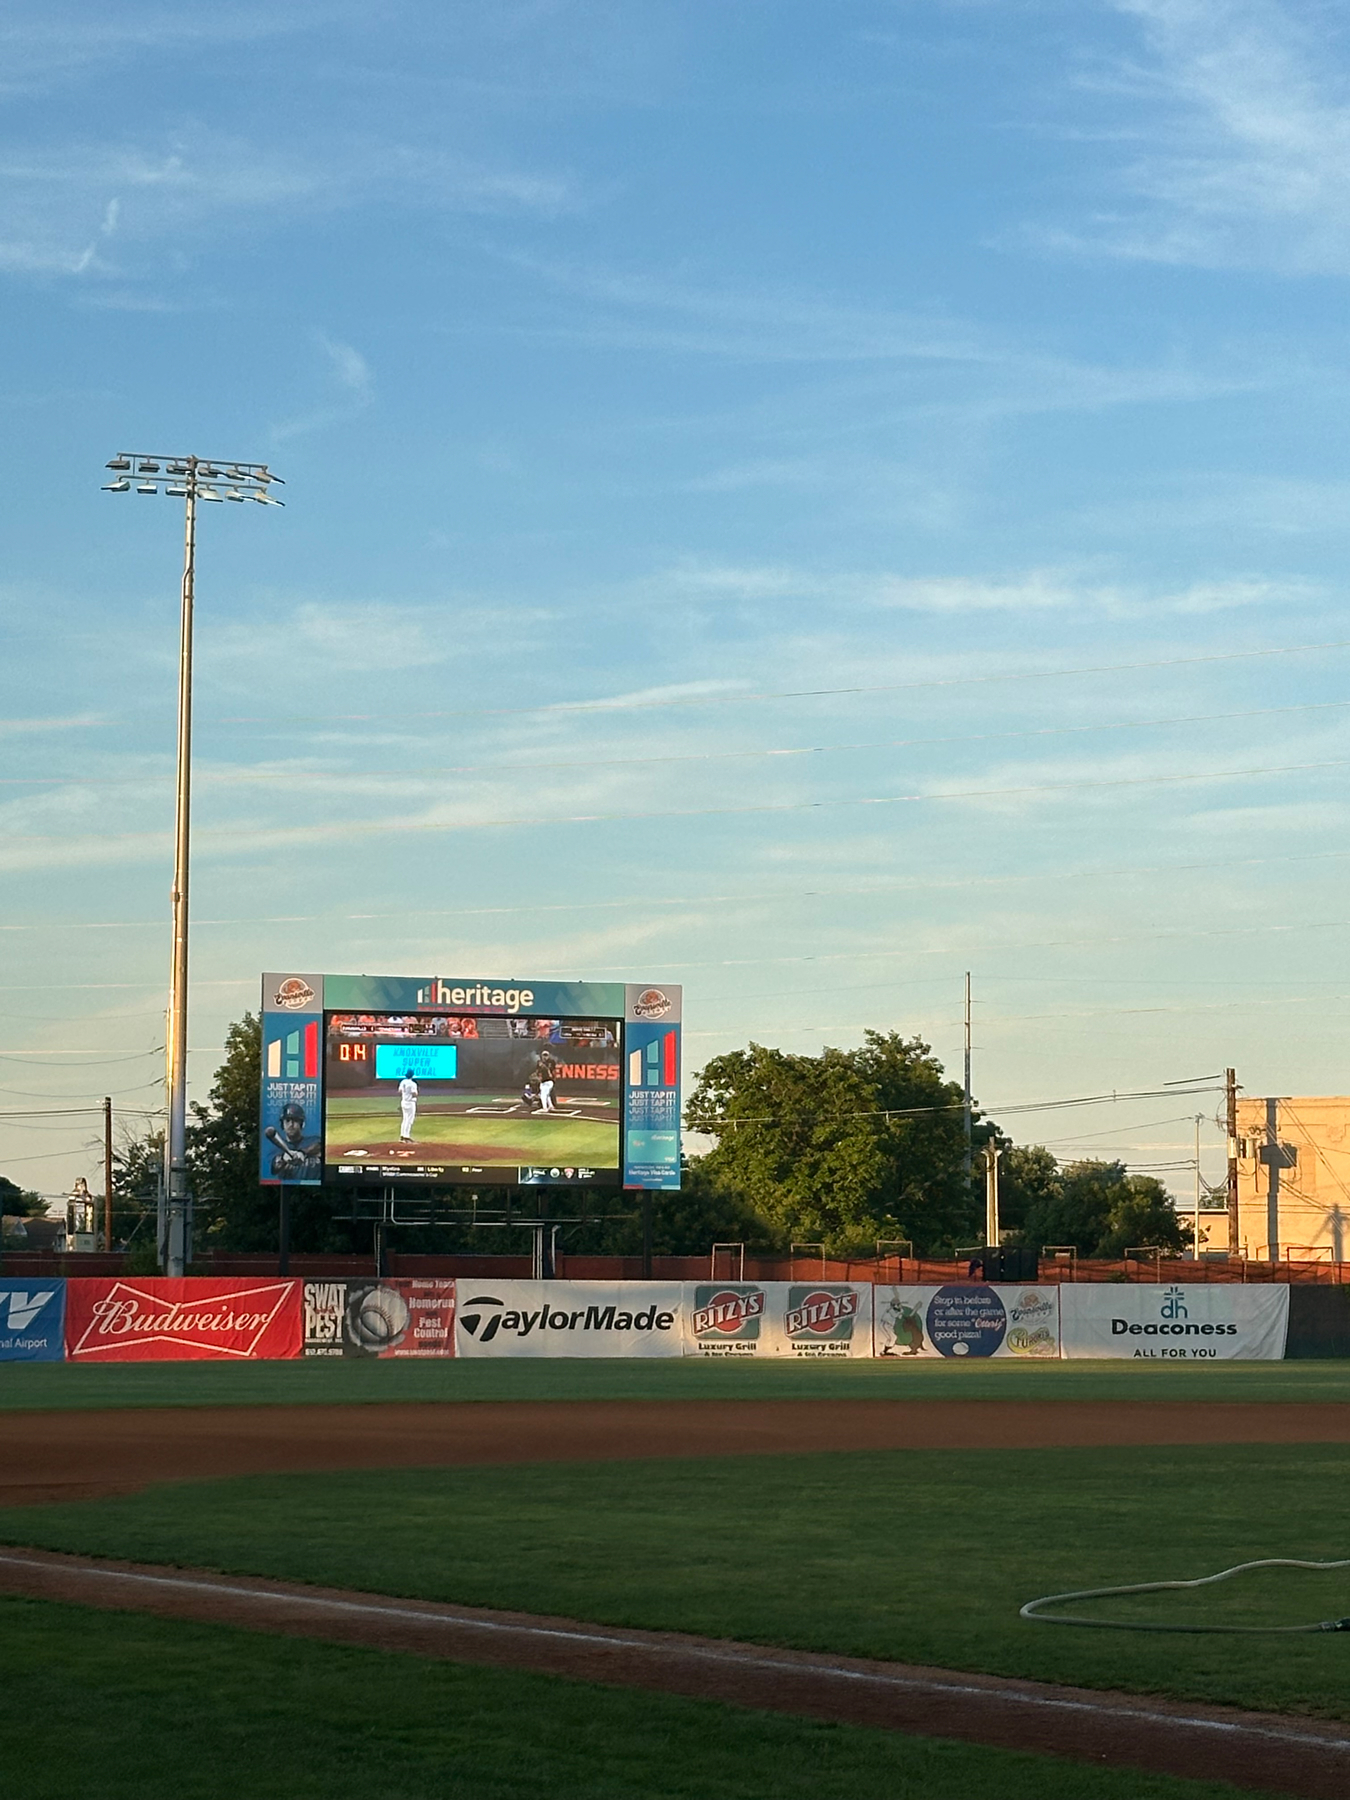 A baseball stadium with a large digital scoreboard displaying game information and advertisements. The field is green with a well-maintained infield and outfield. Advertising banners are visible along the outfield fence. The sky is clear with light clouds, and a tall